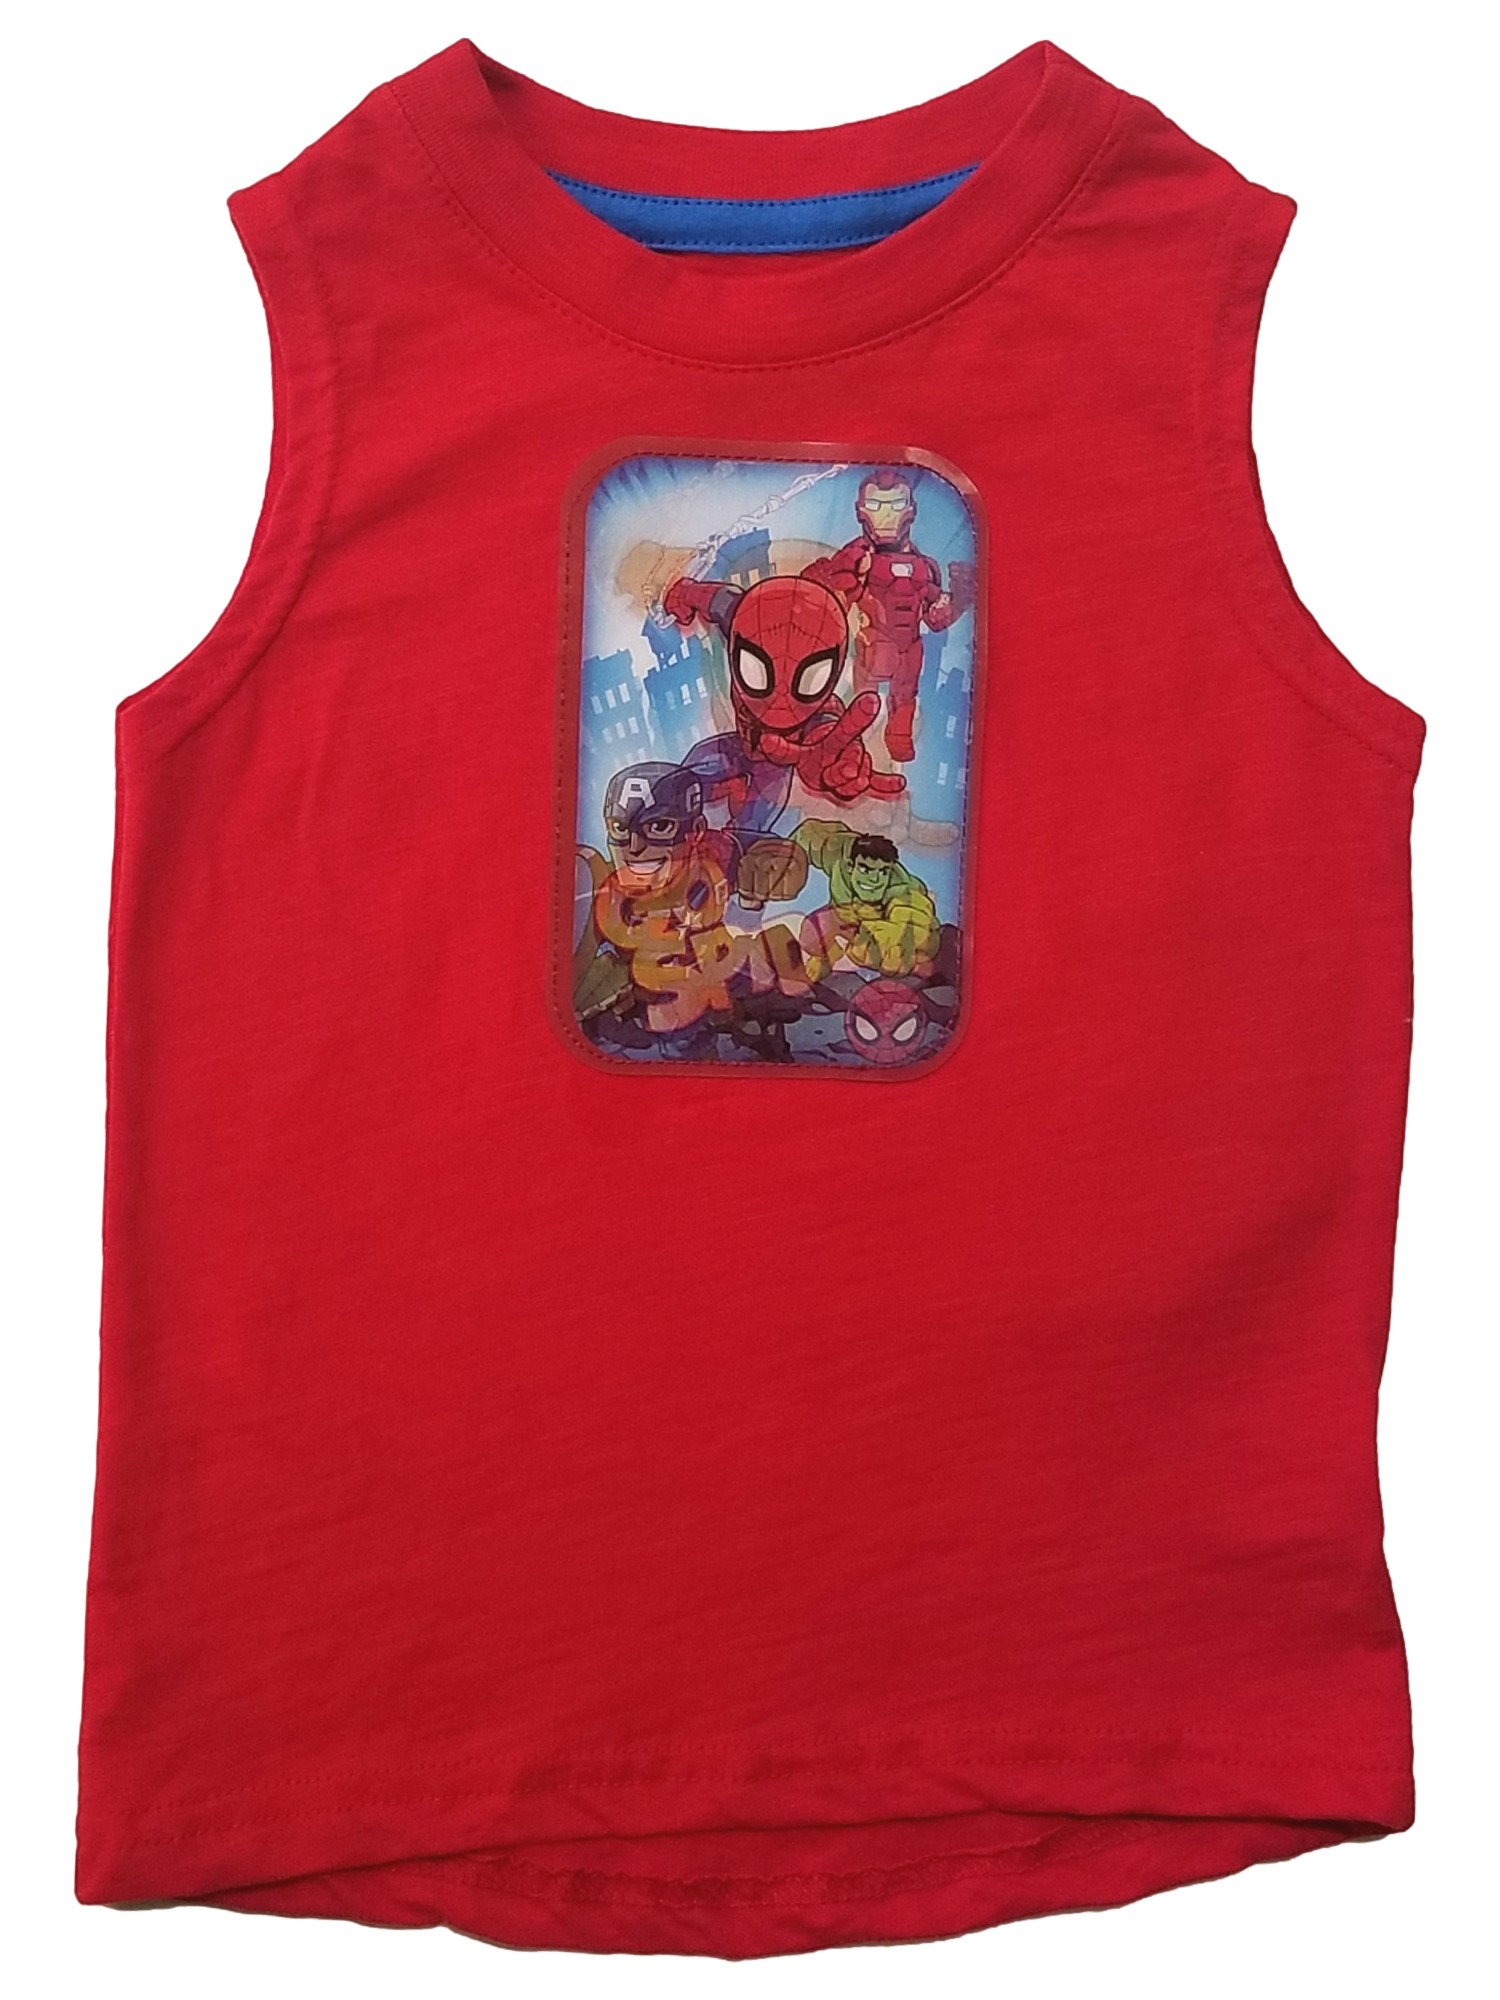 Marvel Toddler Boys Red Spiderman Tank Top Tee Shirt T-Shirt Size 3T